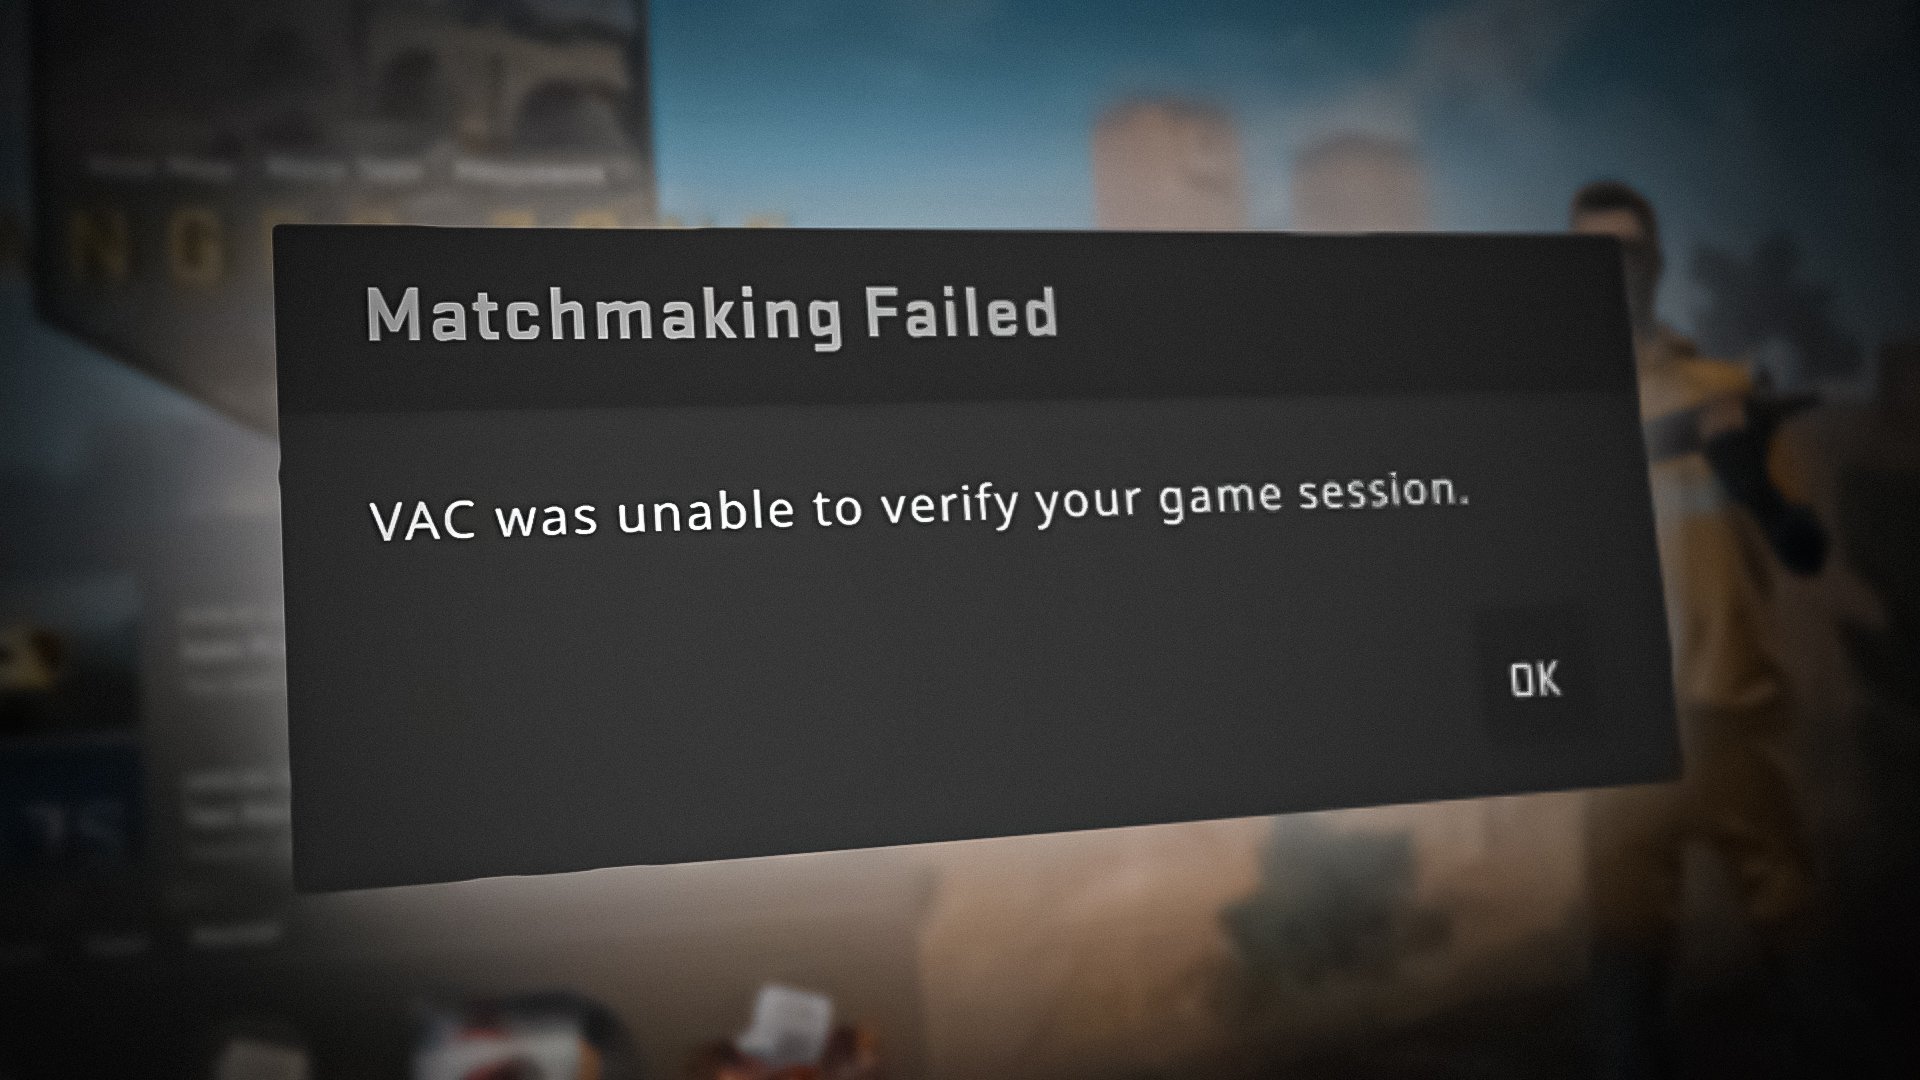 VAC Was Unable to Verify Your Game Session Error